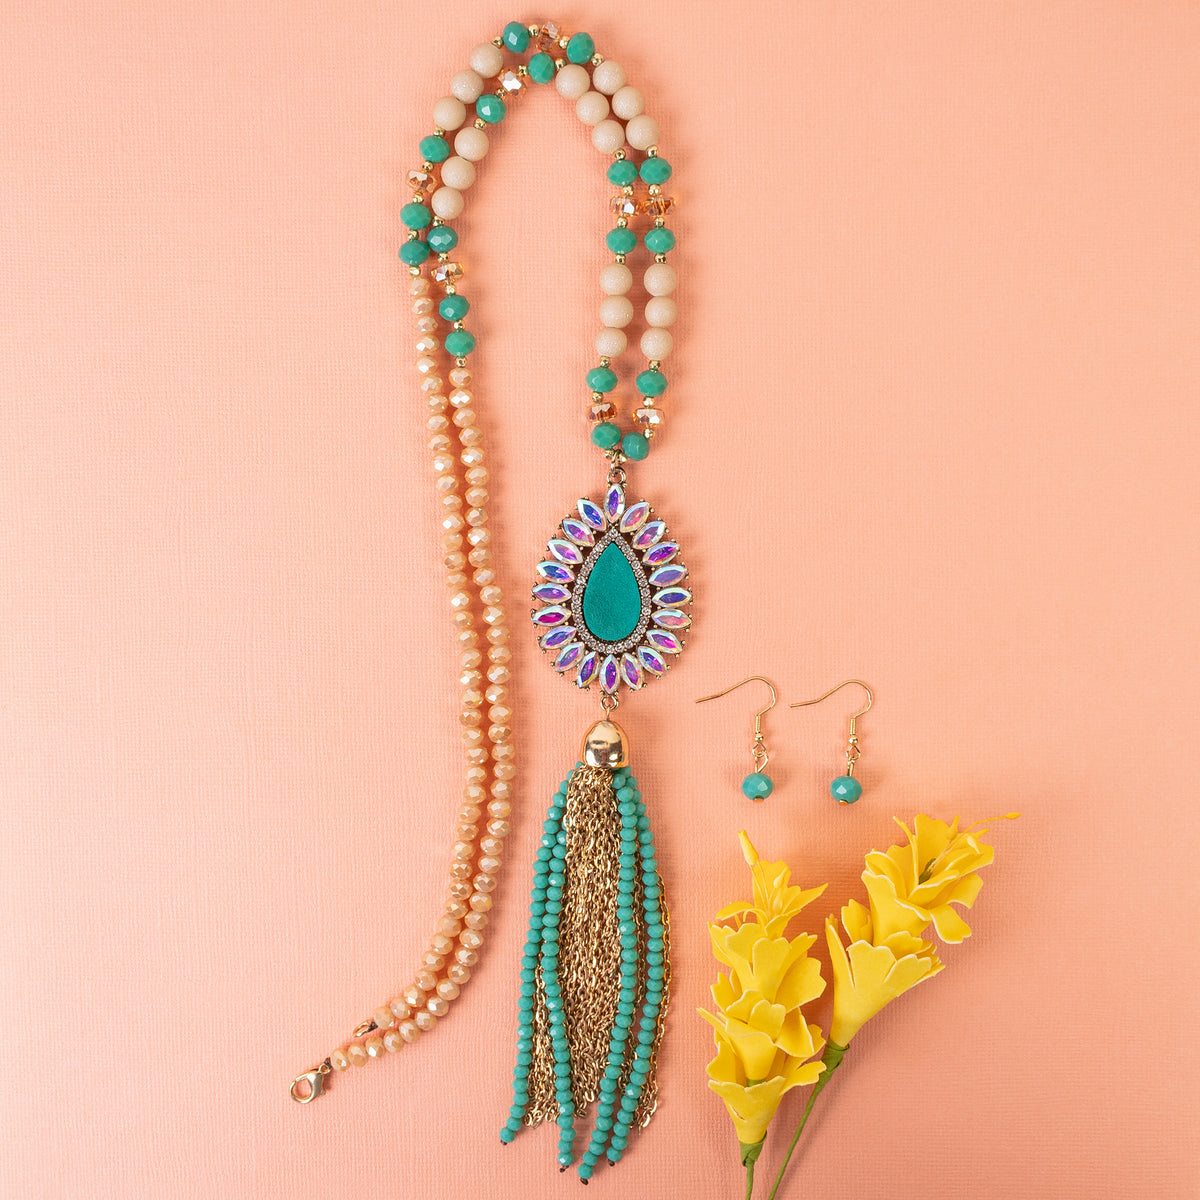 72964 - Beaded Tassel Necklace - Turquoise